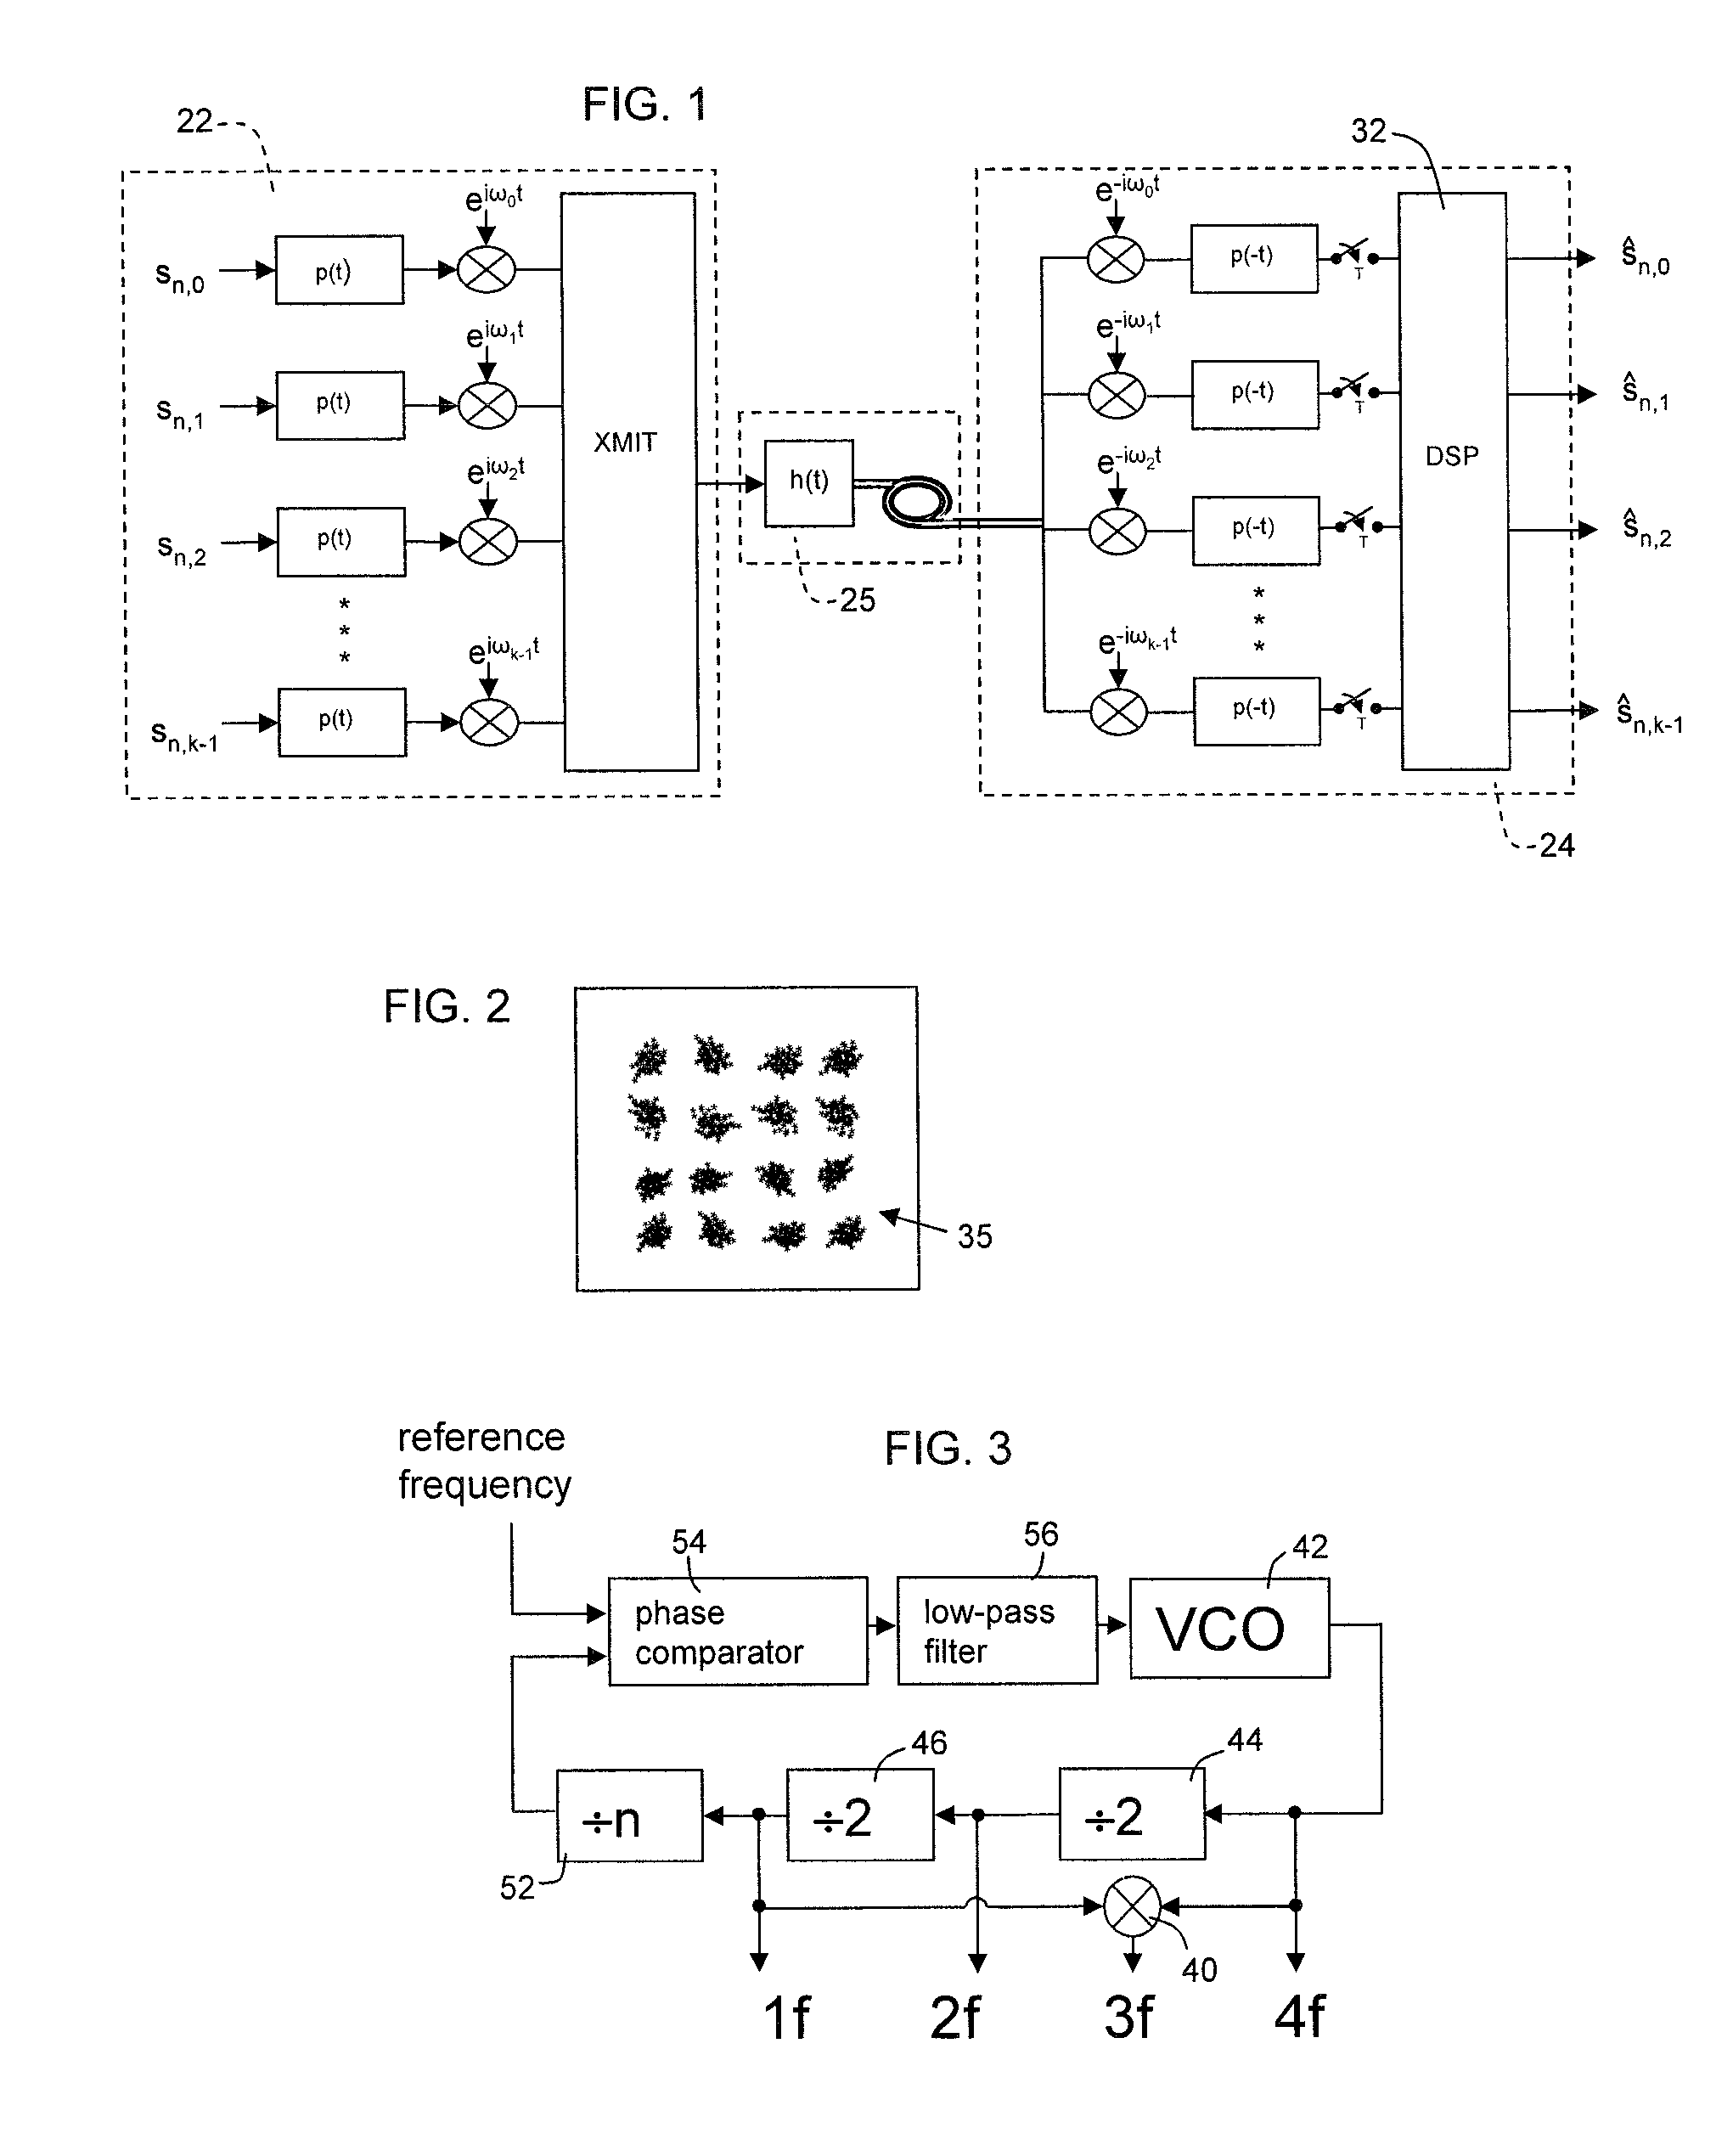 Multiple frequency generator for quadrature amplitude modulated communications